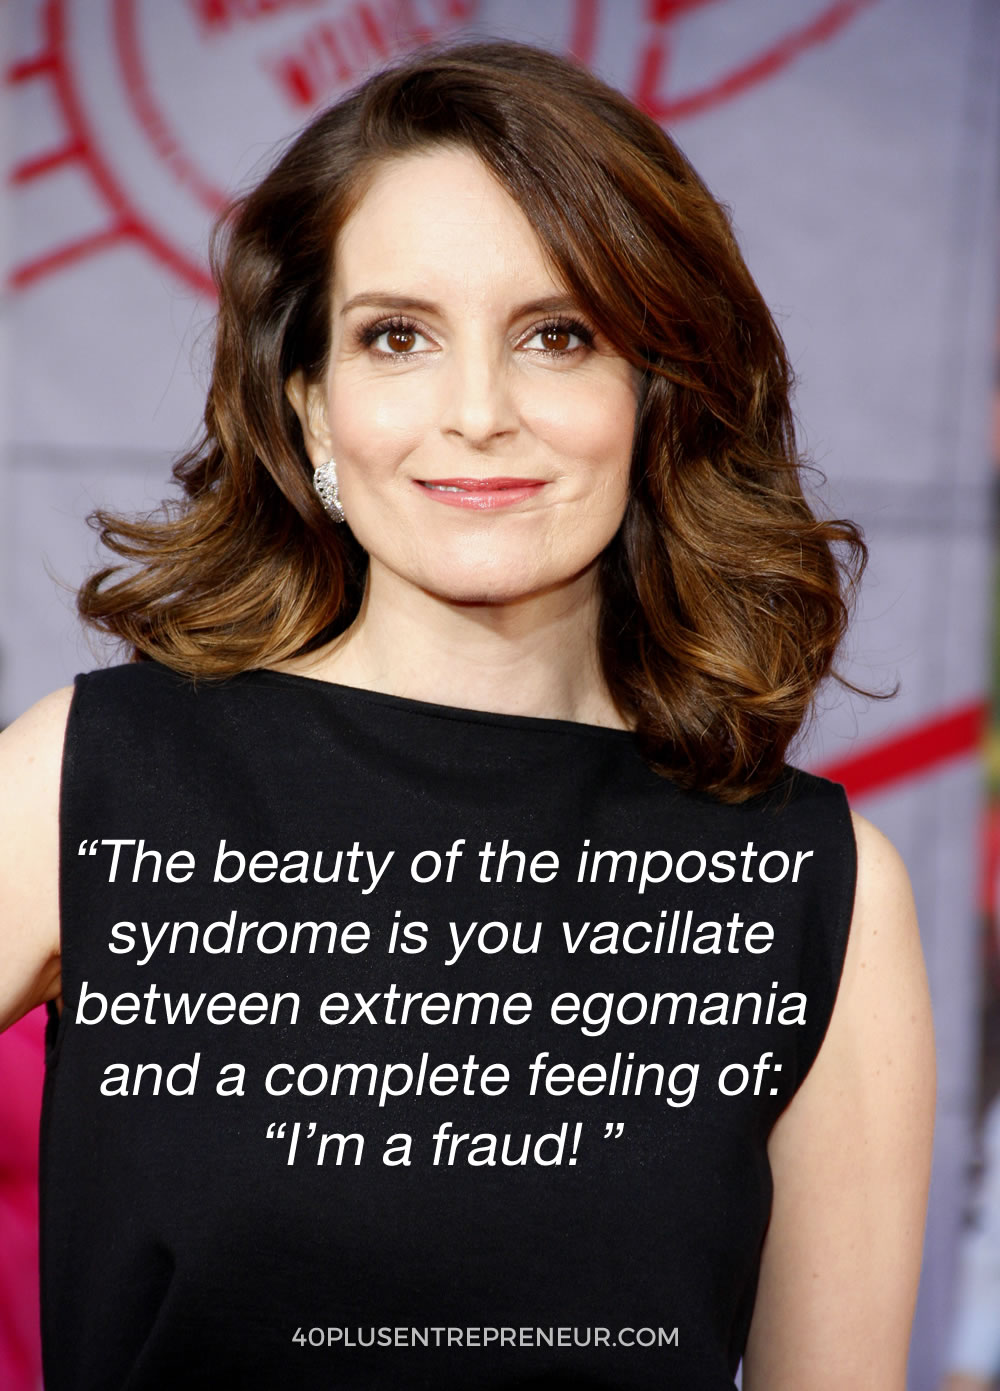 "The beauty of the imposter syndrome is you vacillate between extreme egomania and a complete feeling of "I'm a fraud!" - Tina Fey talks about imposter syndrome. Find out how to overcome imposter syndrome at truepotentialacademy.com